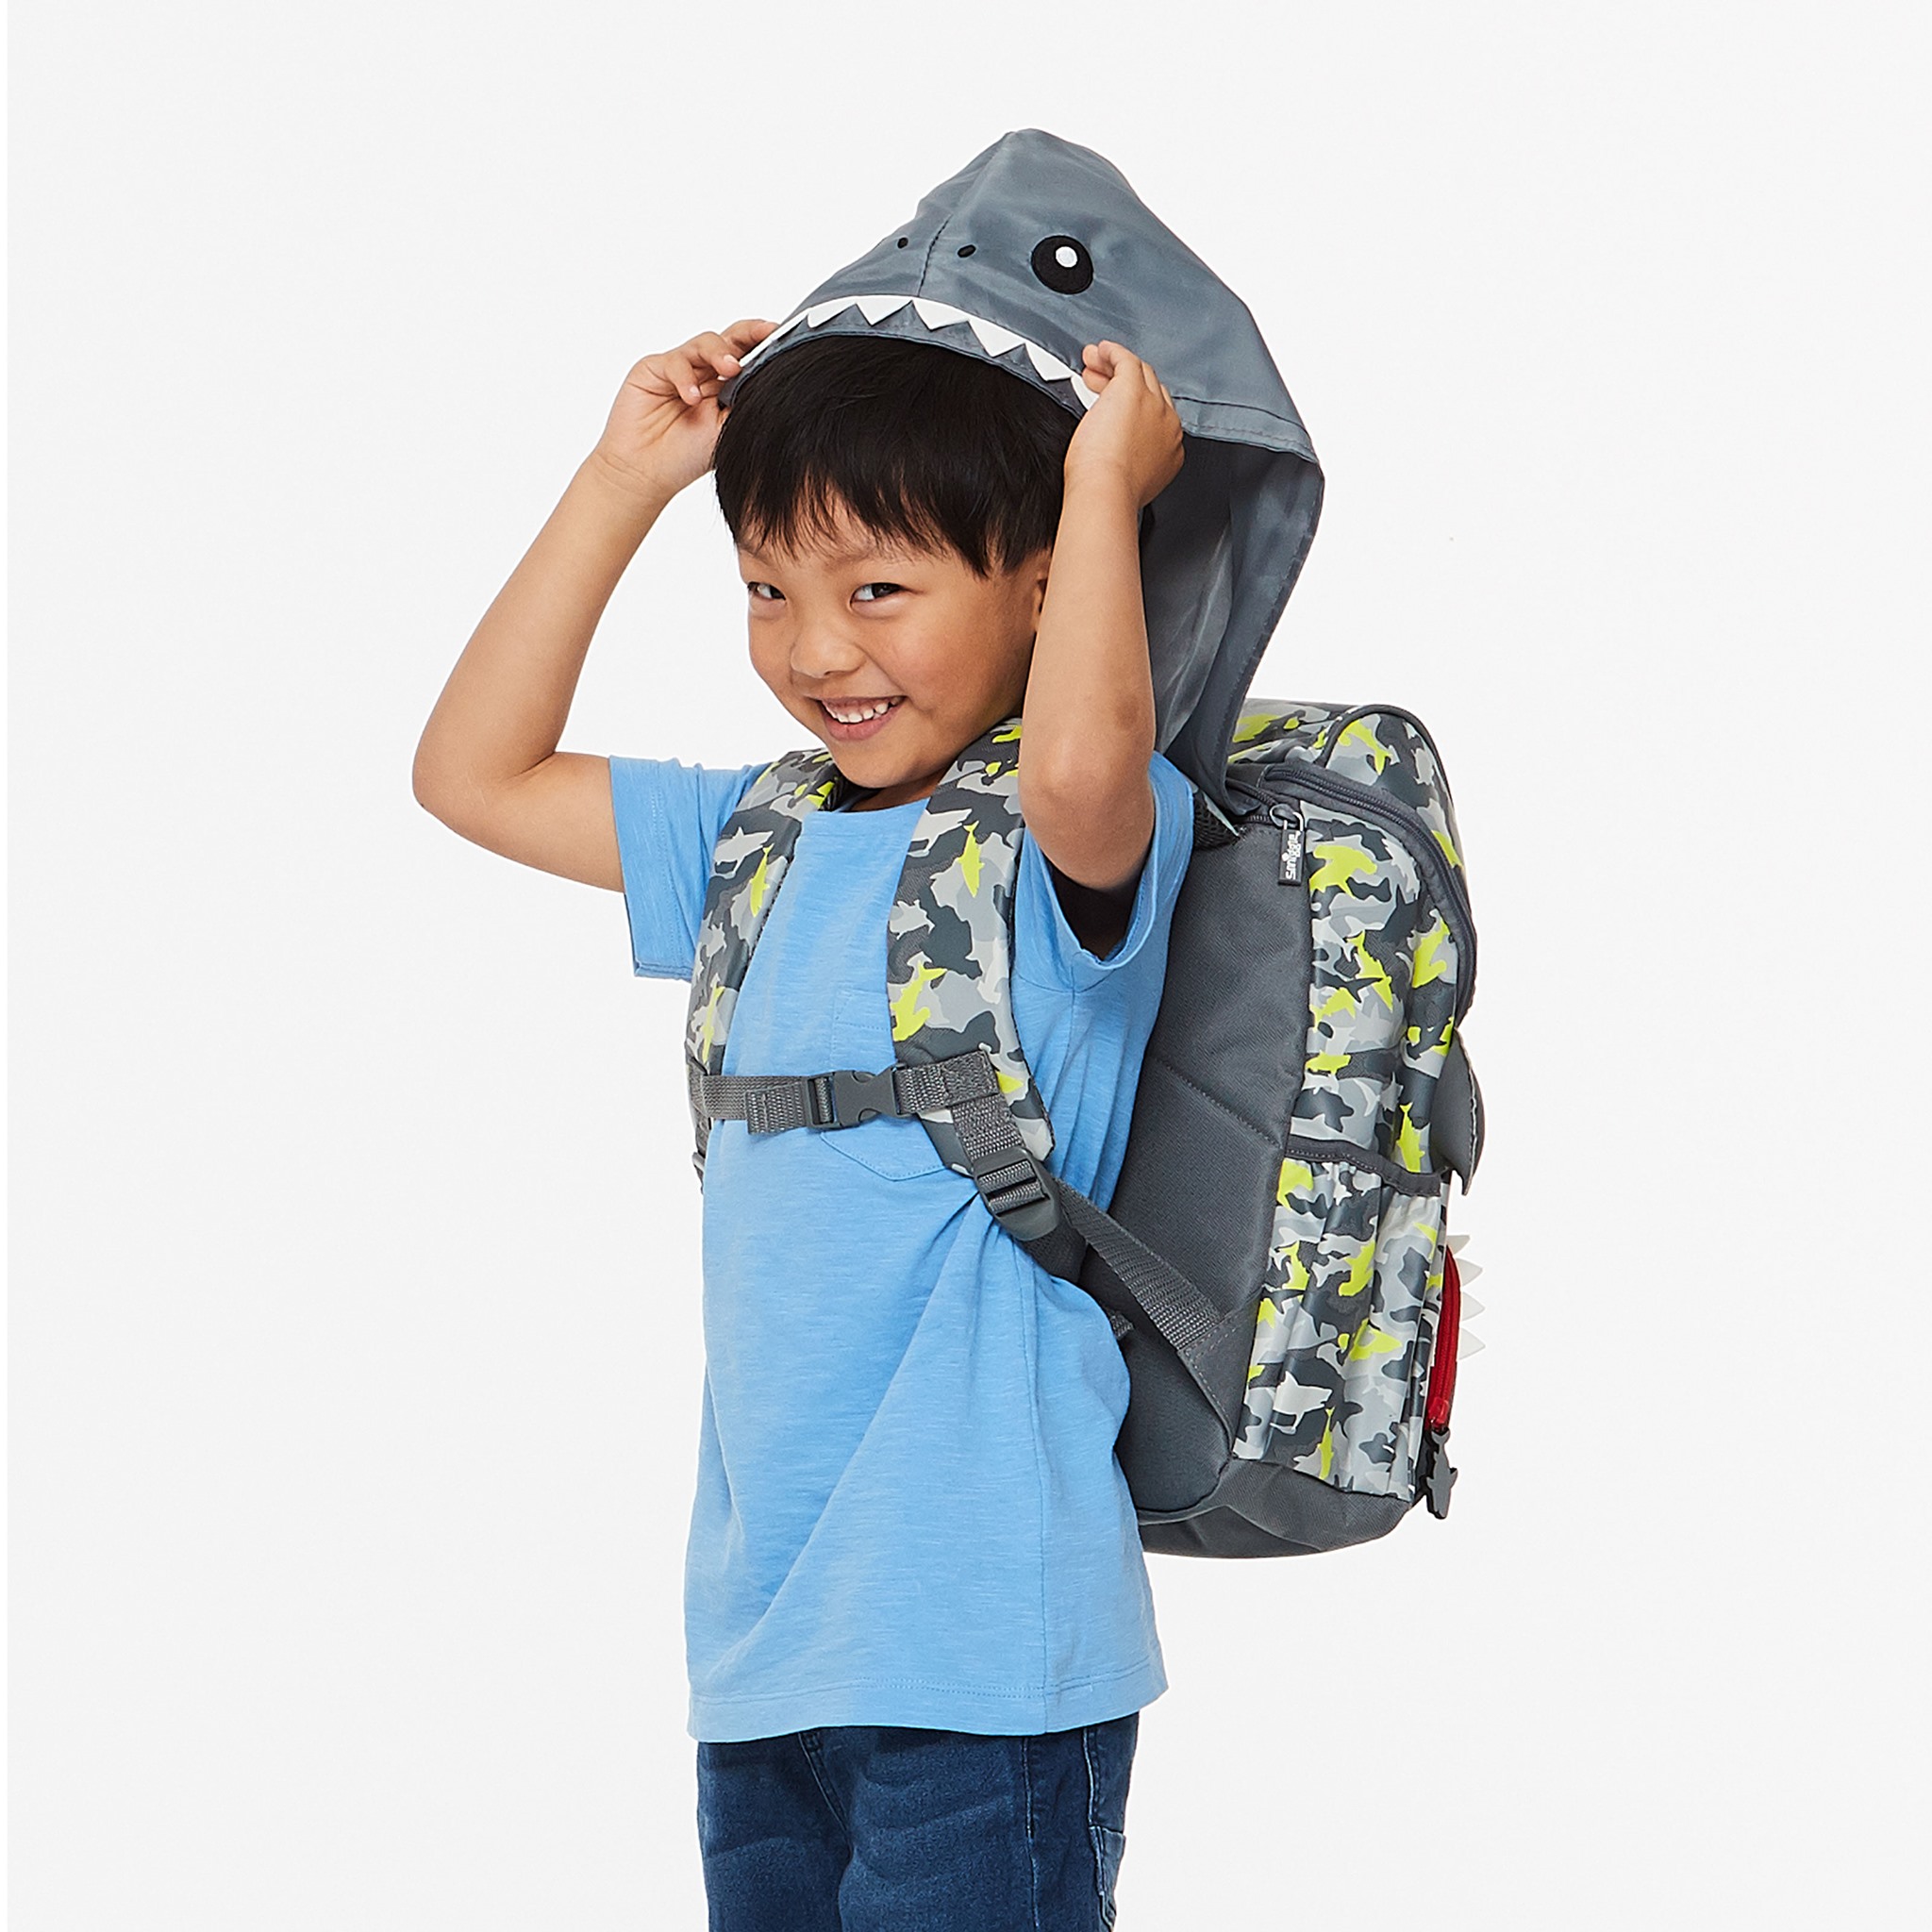 Chomp Chomp 🦈 our character hoodie backpacks are perfect for preschoolers, you can choose between a chomping shark or a dreamy unicorn! shop them instore now🌟